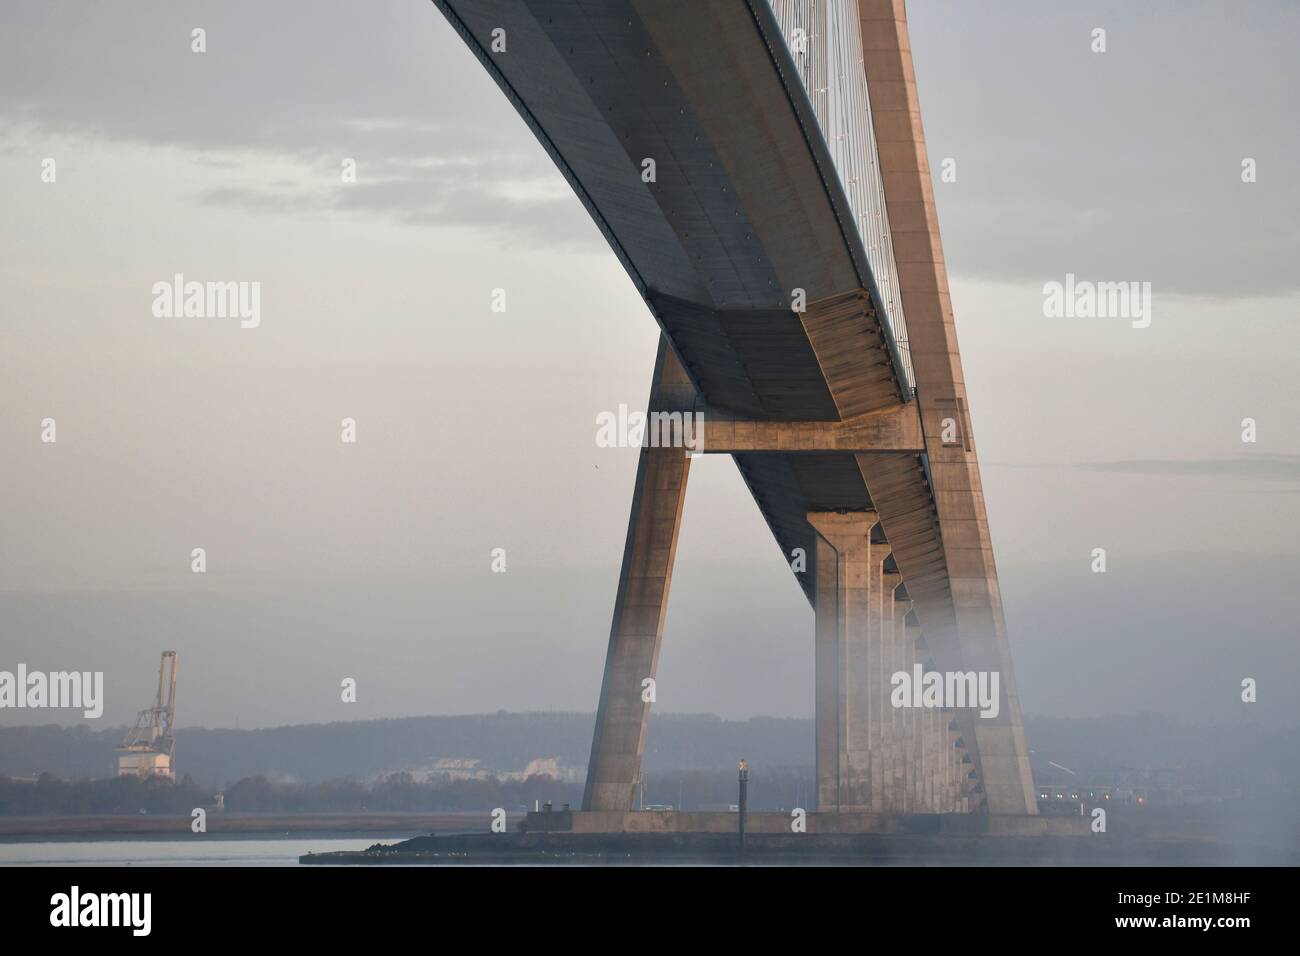 The Normandy Bridge on the estuary of the River Seine (Normandy, northern France): detail of the cable-stayed road bridge with a pylon and guy wires t Stock Photo